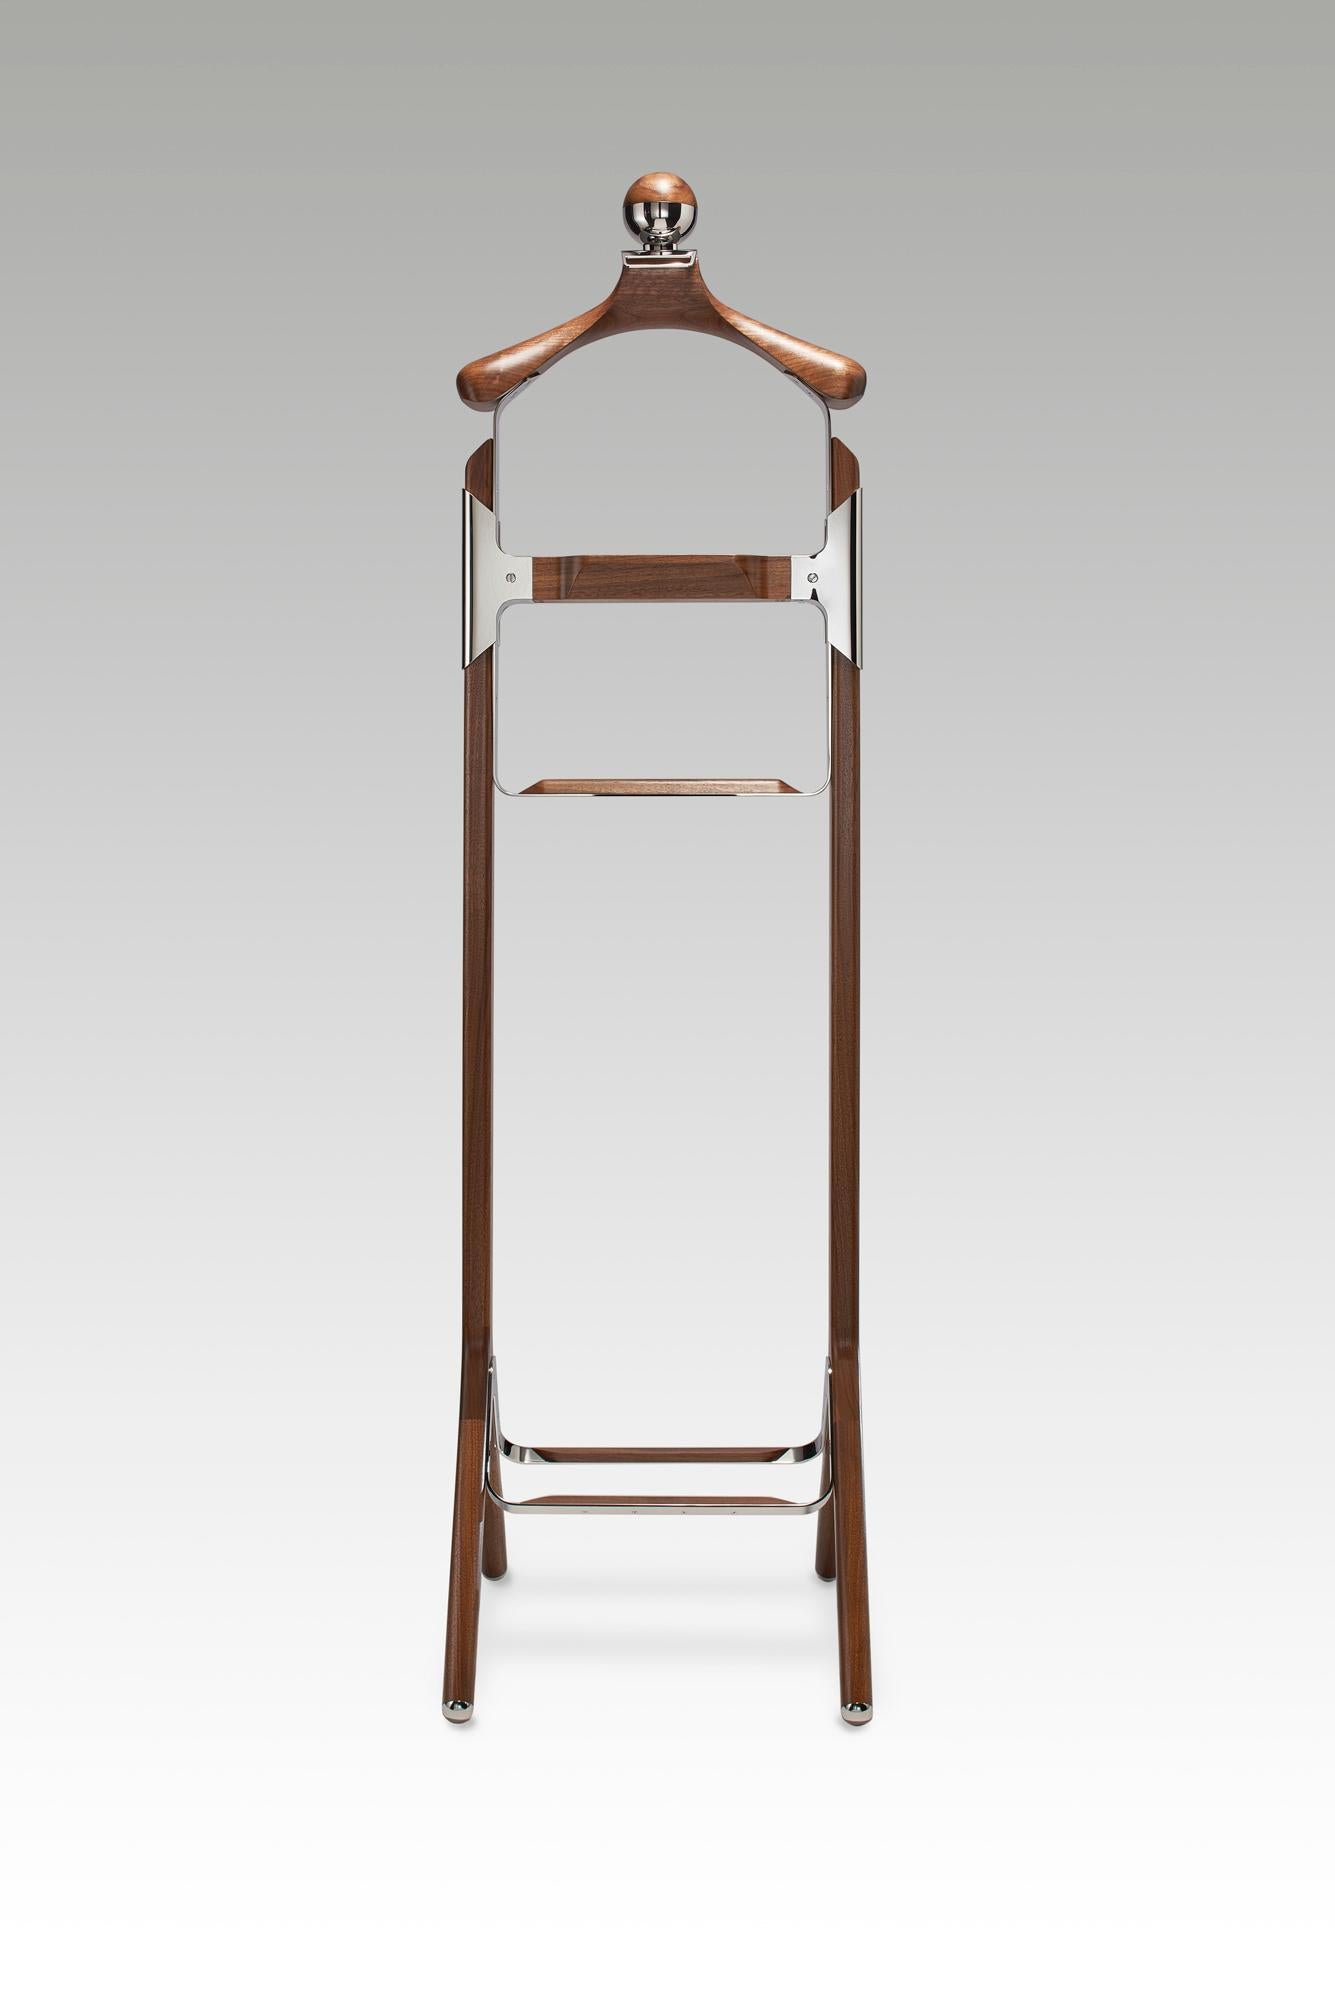 This new Valet stand is designed in close collaboration with Permanent style the UK authority on Classic and luxury menswear. The biggest such site in the country, and one of the largest globally, founded by professional journalist and editor Simon